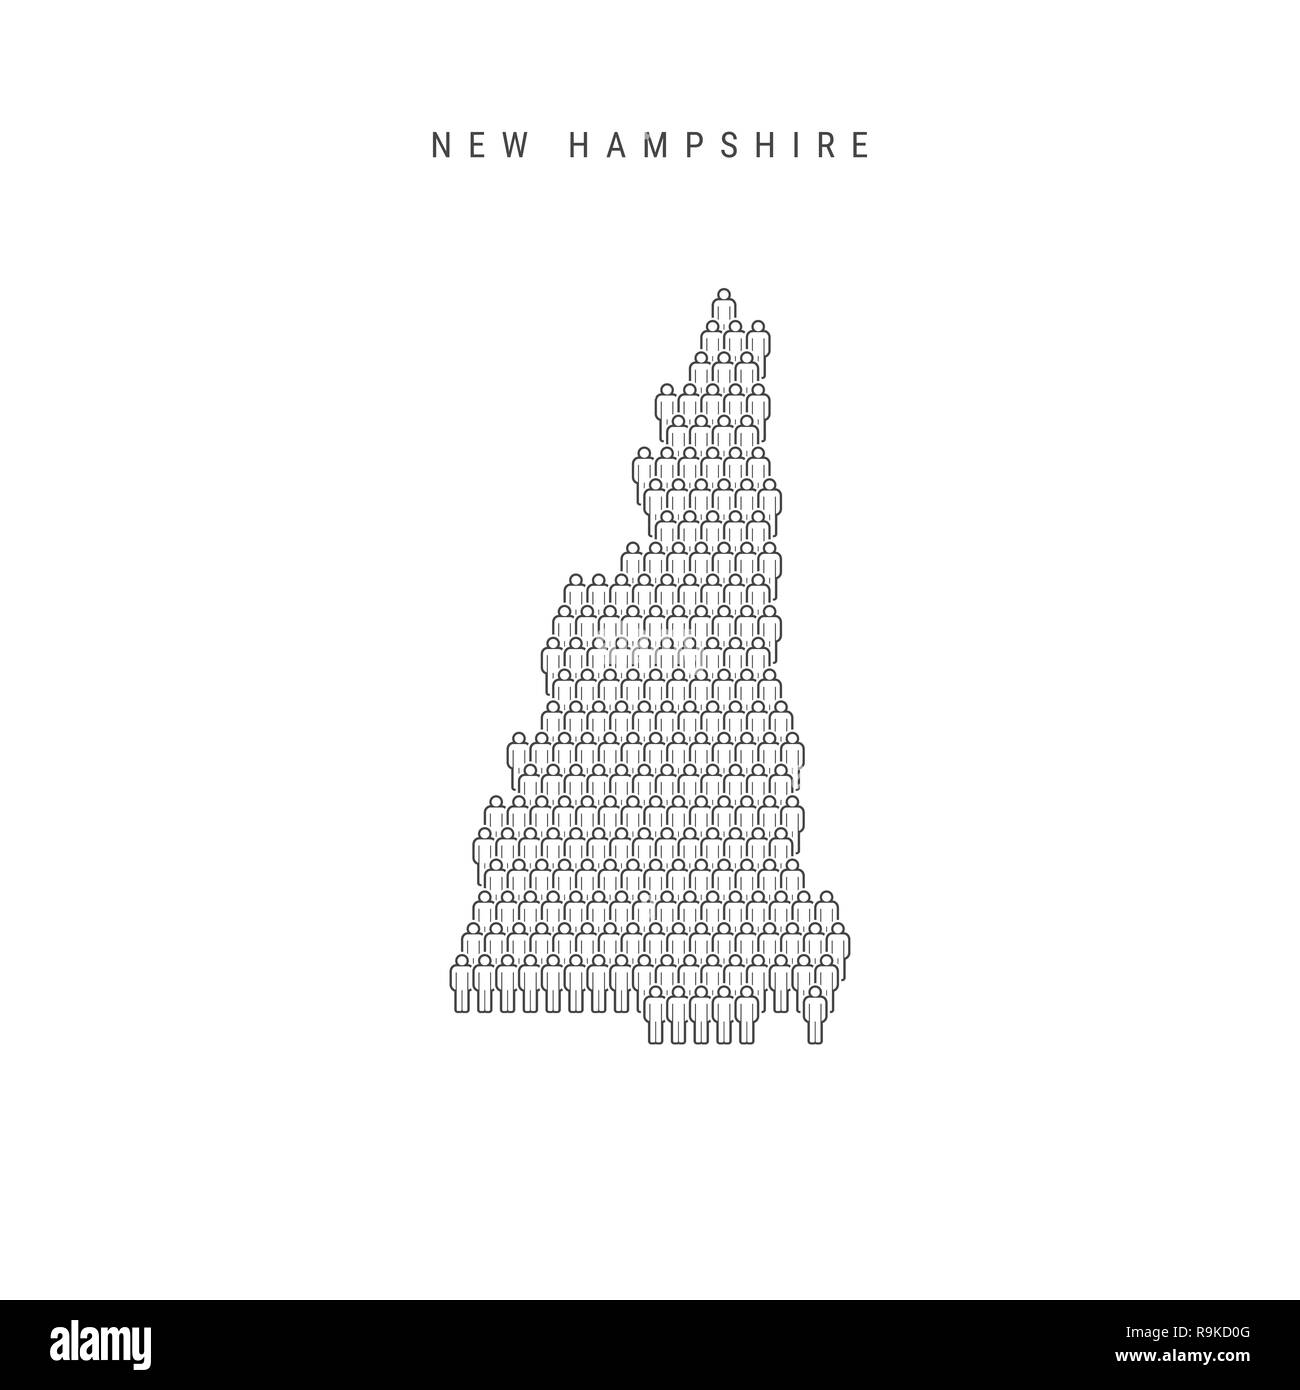 People Map Of New Hampshire Us State Stylized Silhouette People